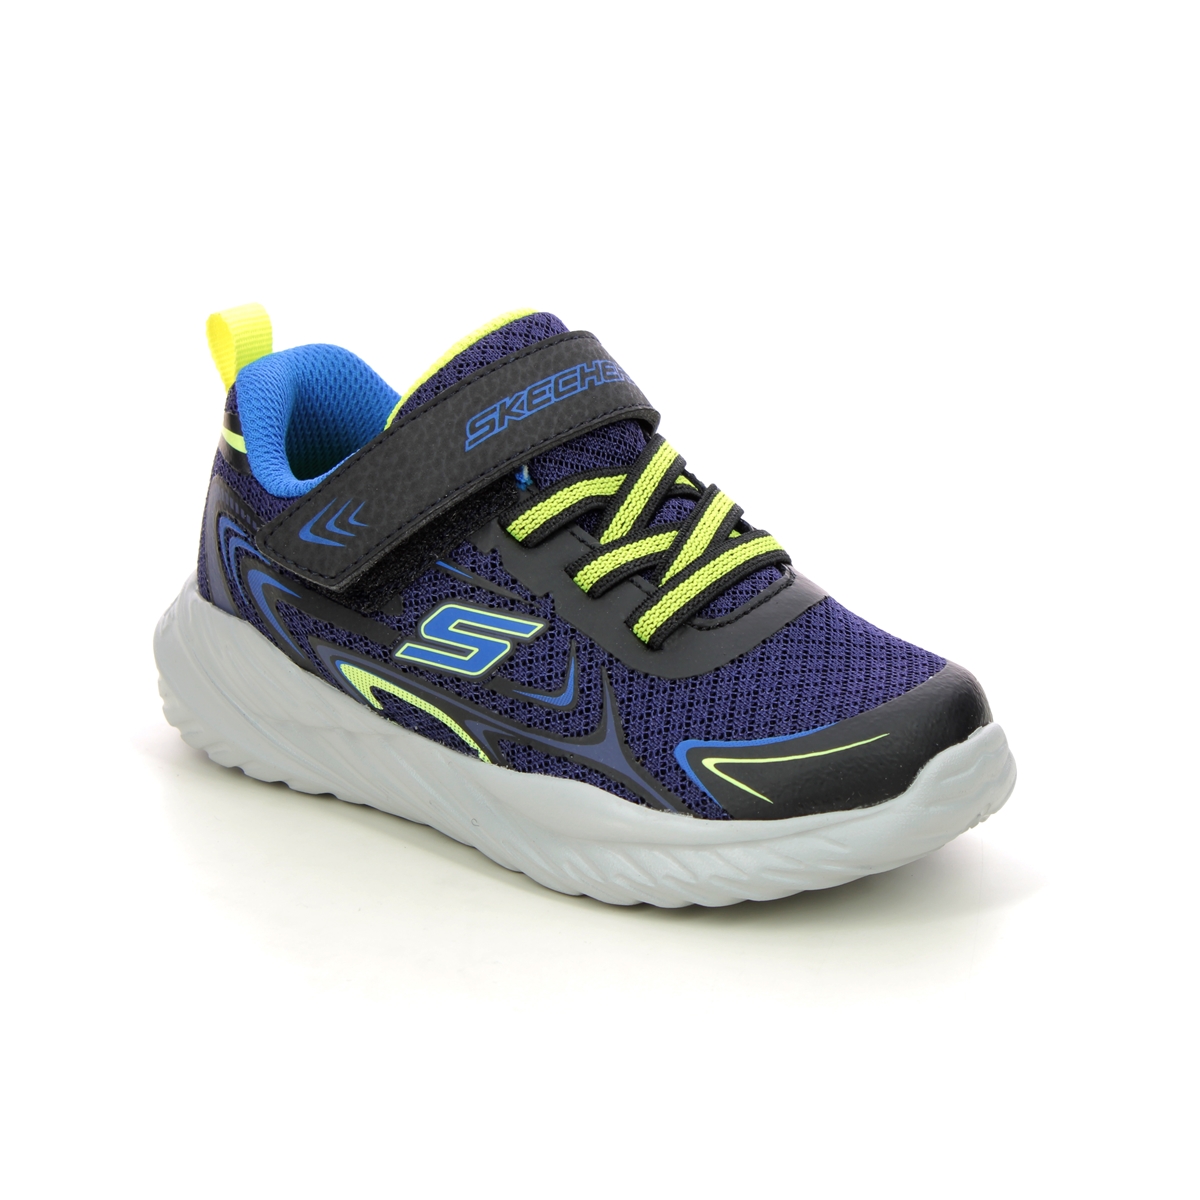 Skechers Lil Sprinter Navy Lime Kids Trainers 403887N In Size 24 In Plain Navy Lime For kids